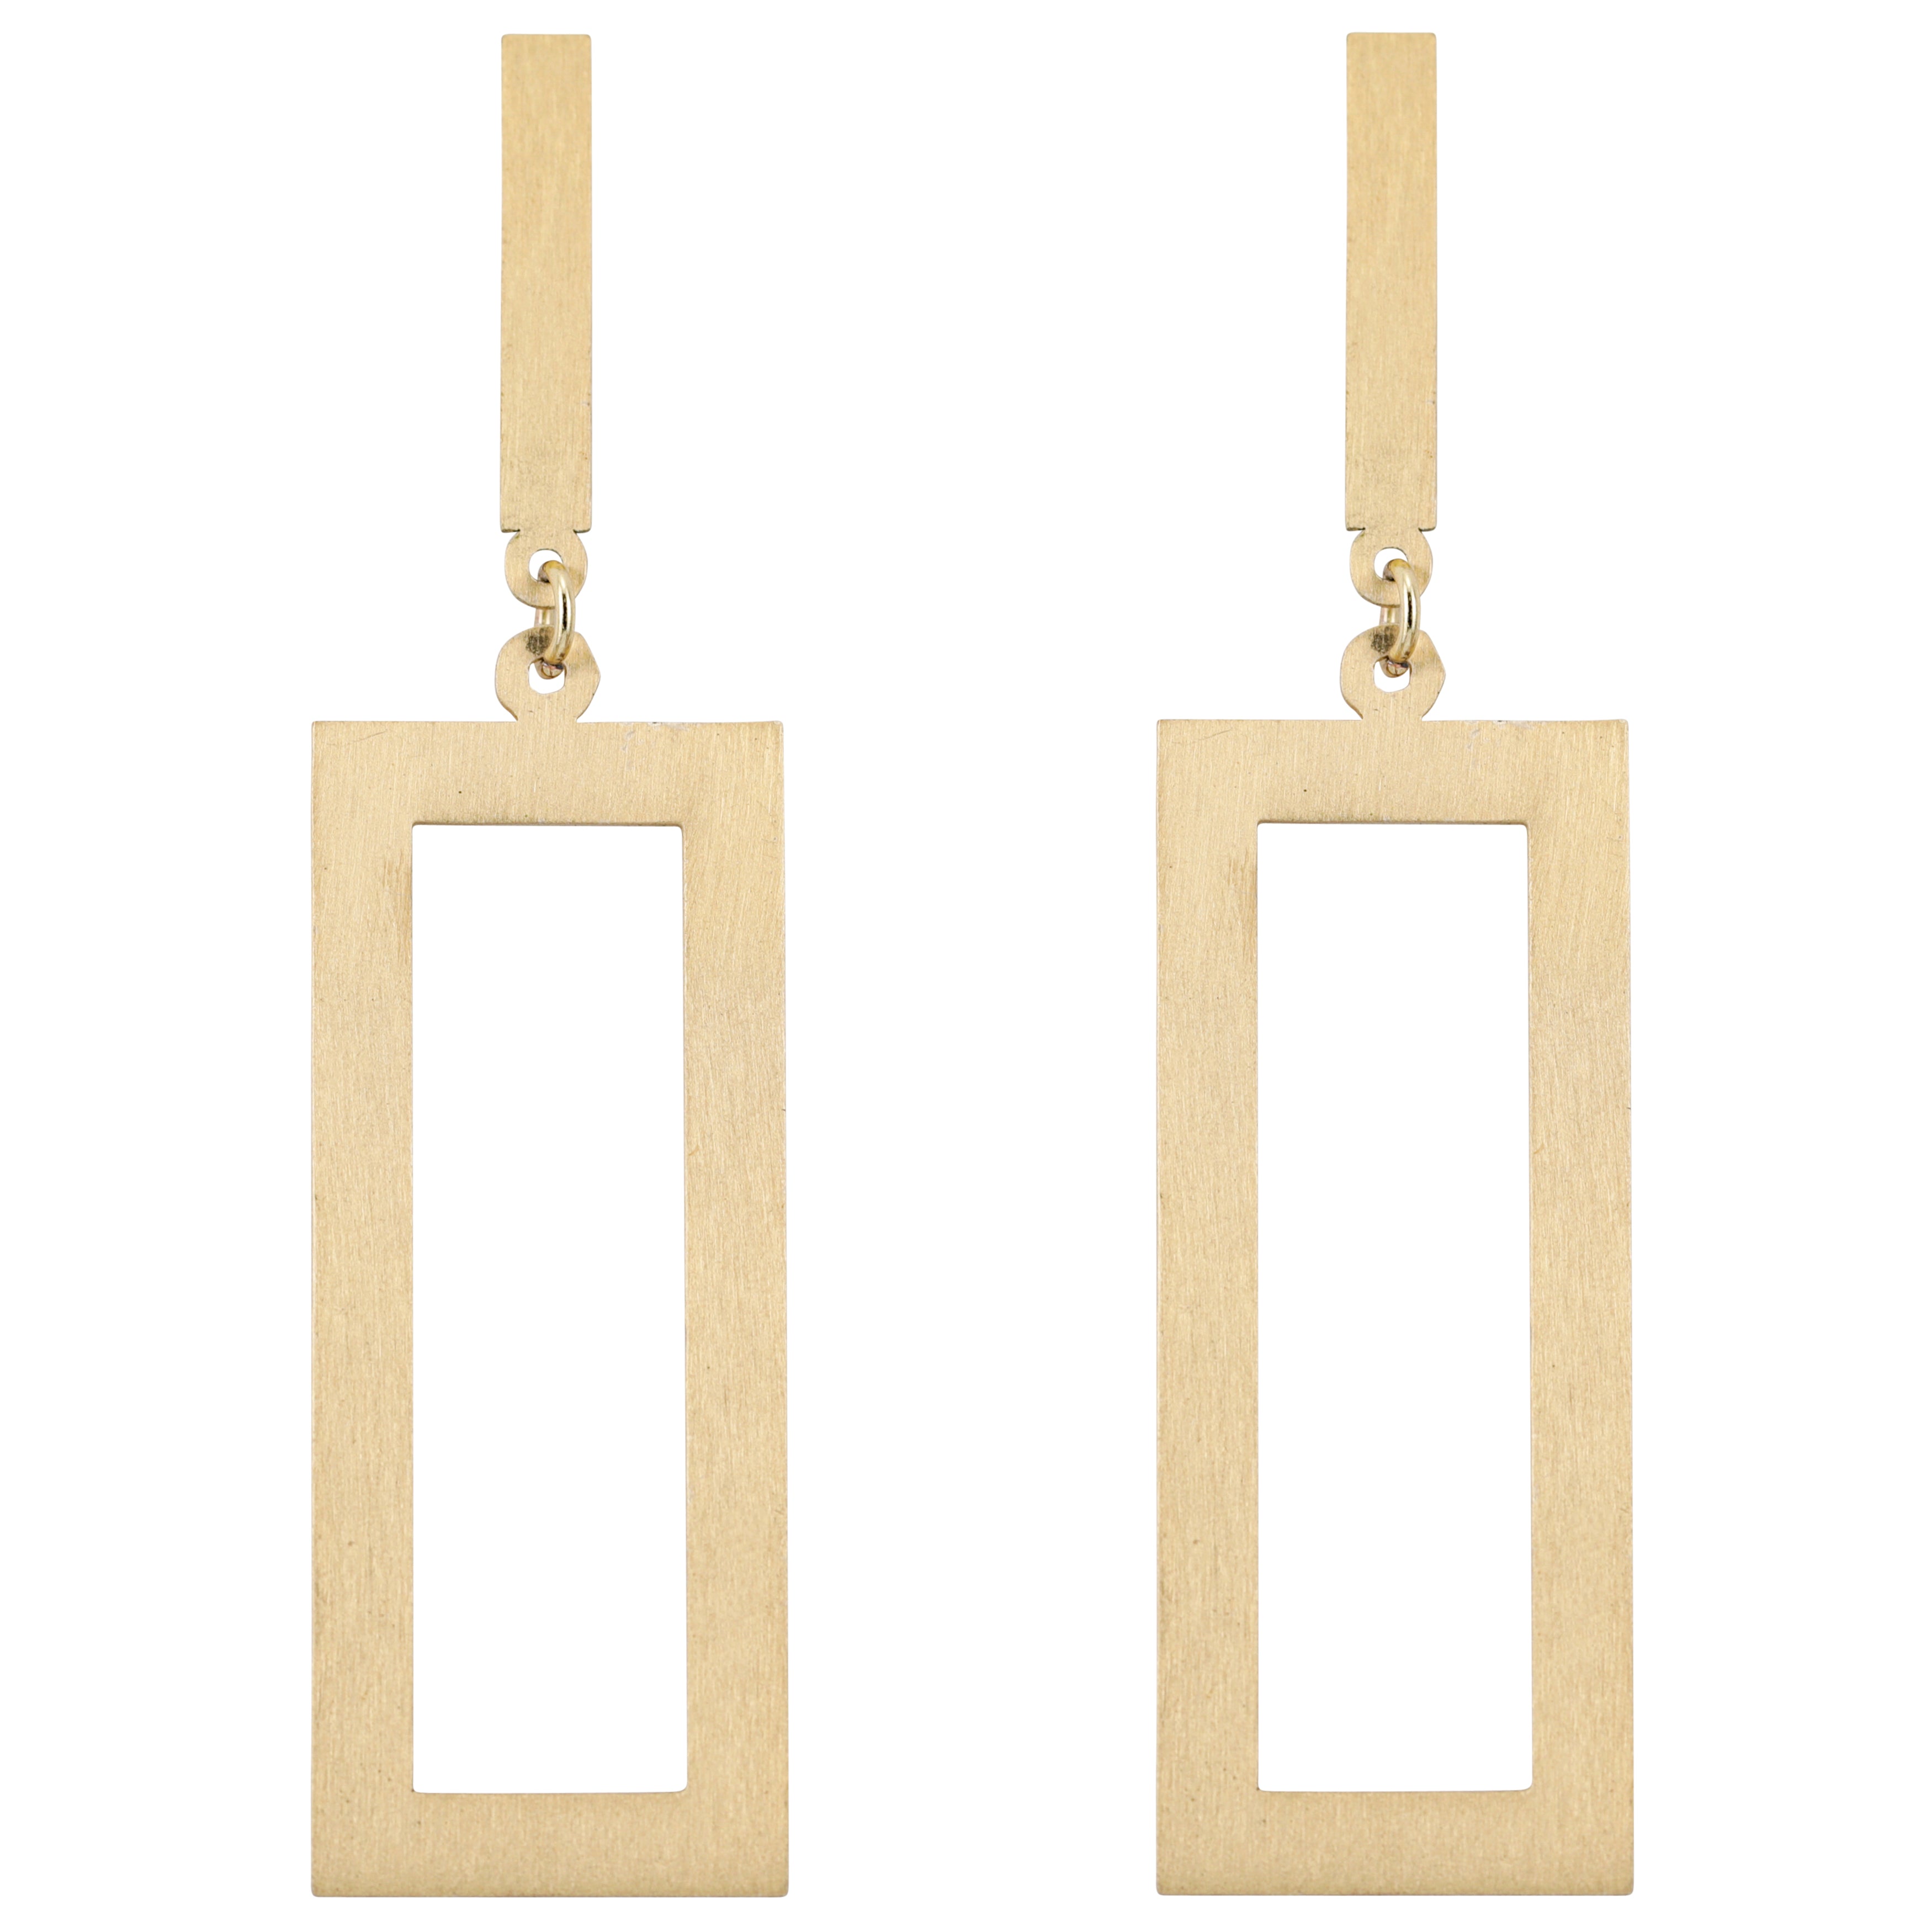 Gold Double Rectangle Earring